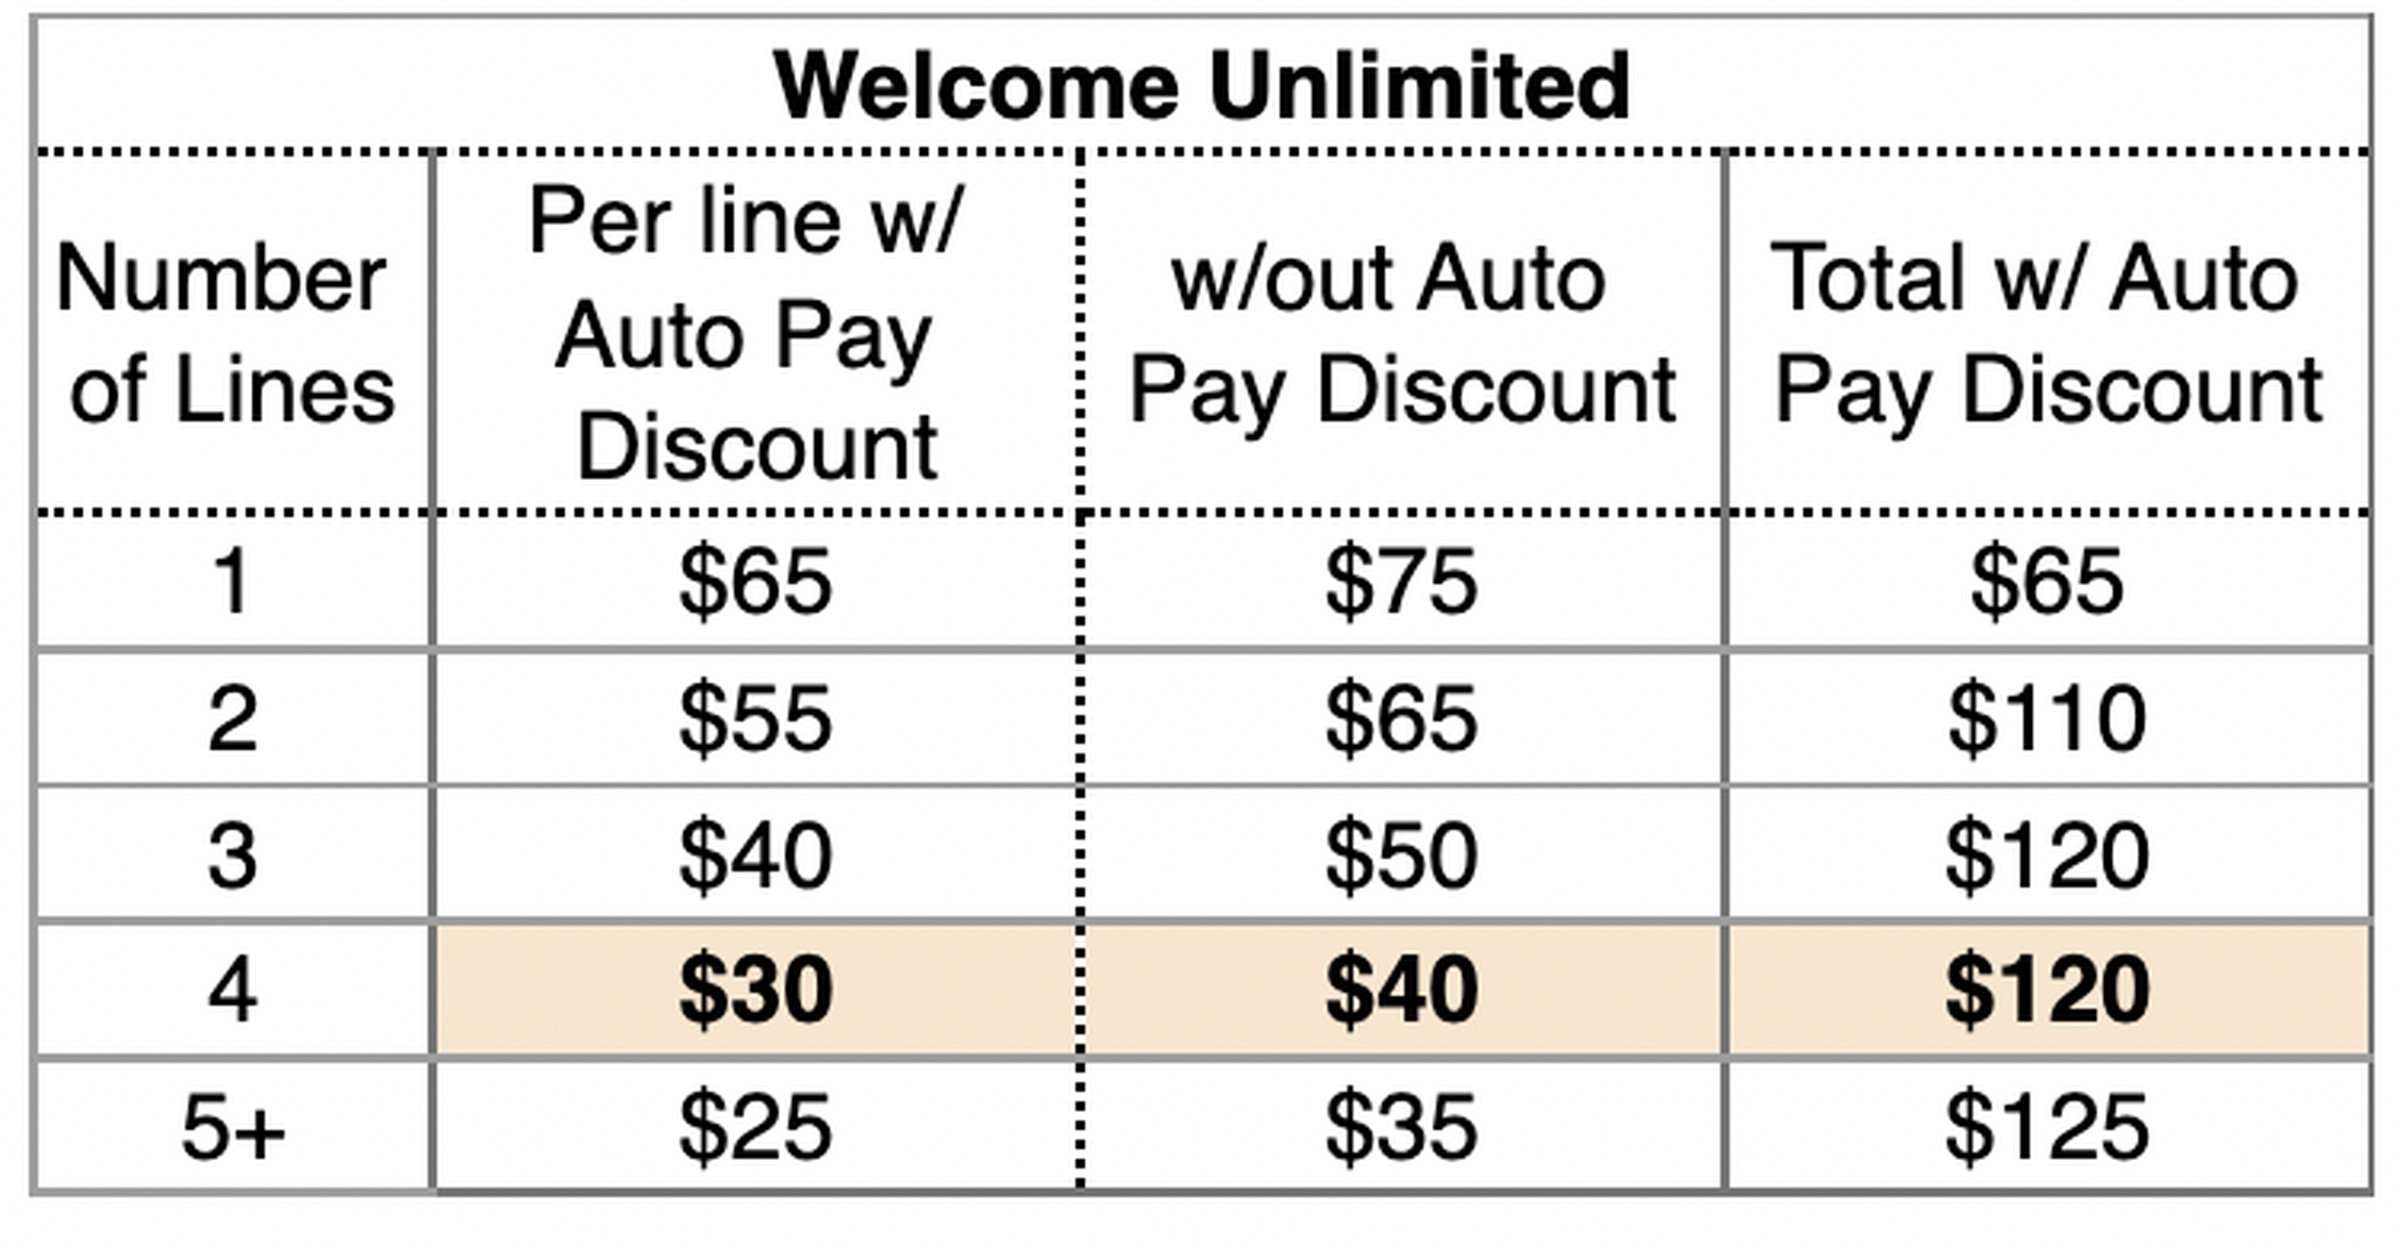 Here’s how much you’ll pay for Welcome Unlimited based on how many lines you have.